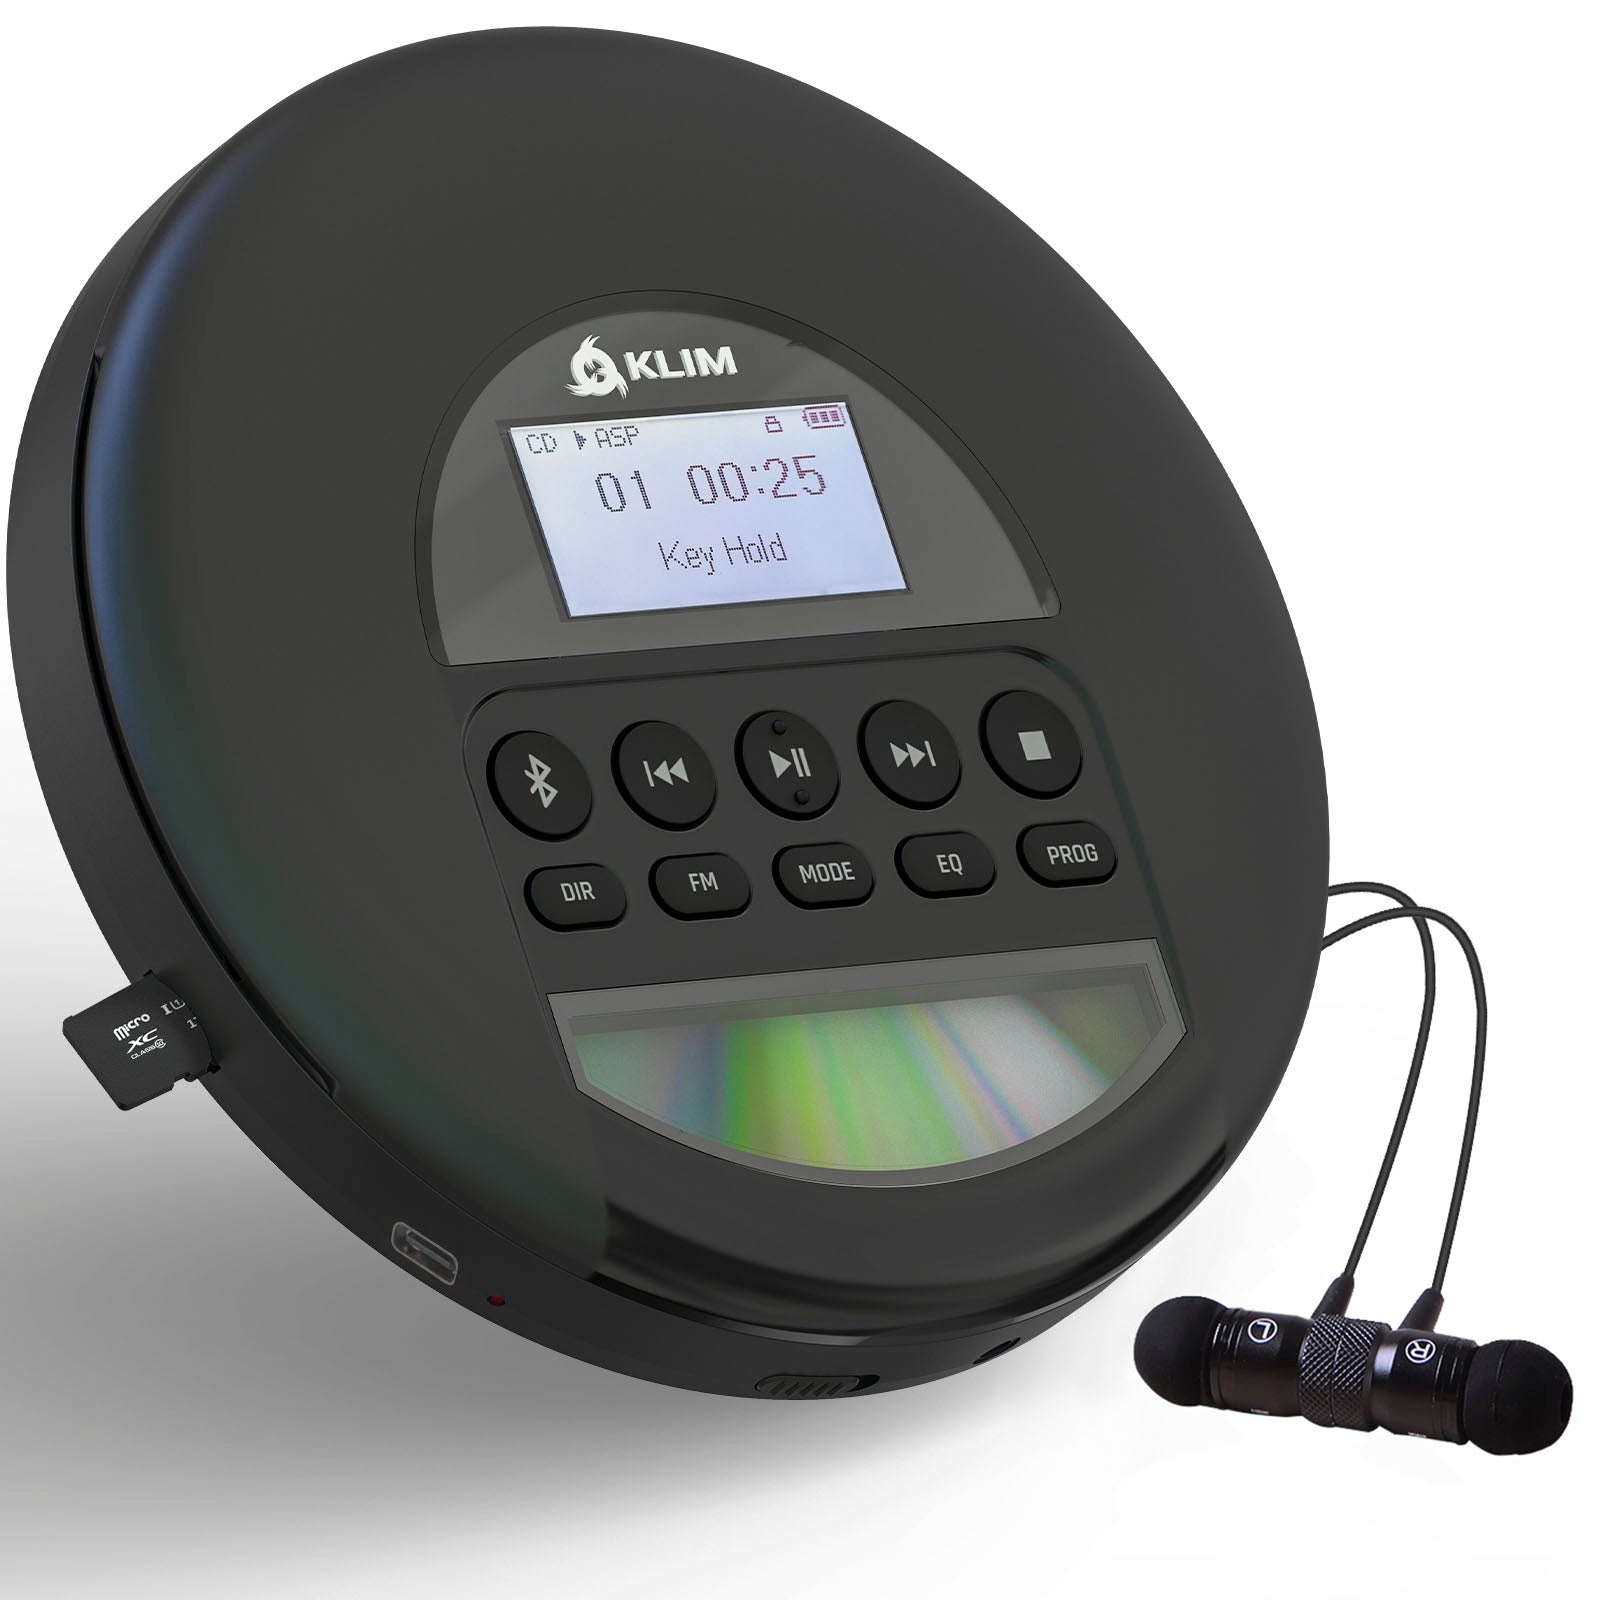 Klim Nomad - New 2023 - Portable CD Player Walkman with Long-Lasting Battery - with Headphones - Radio FM - Compatible MP3 CD PL